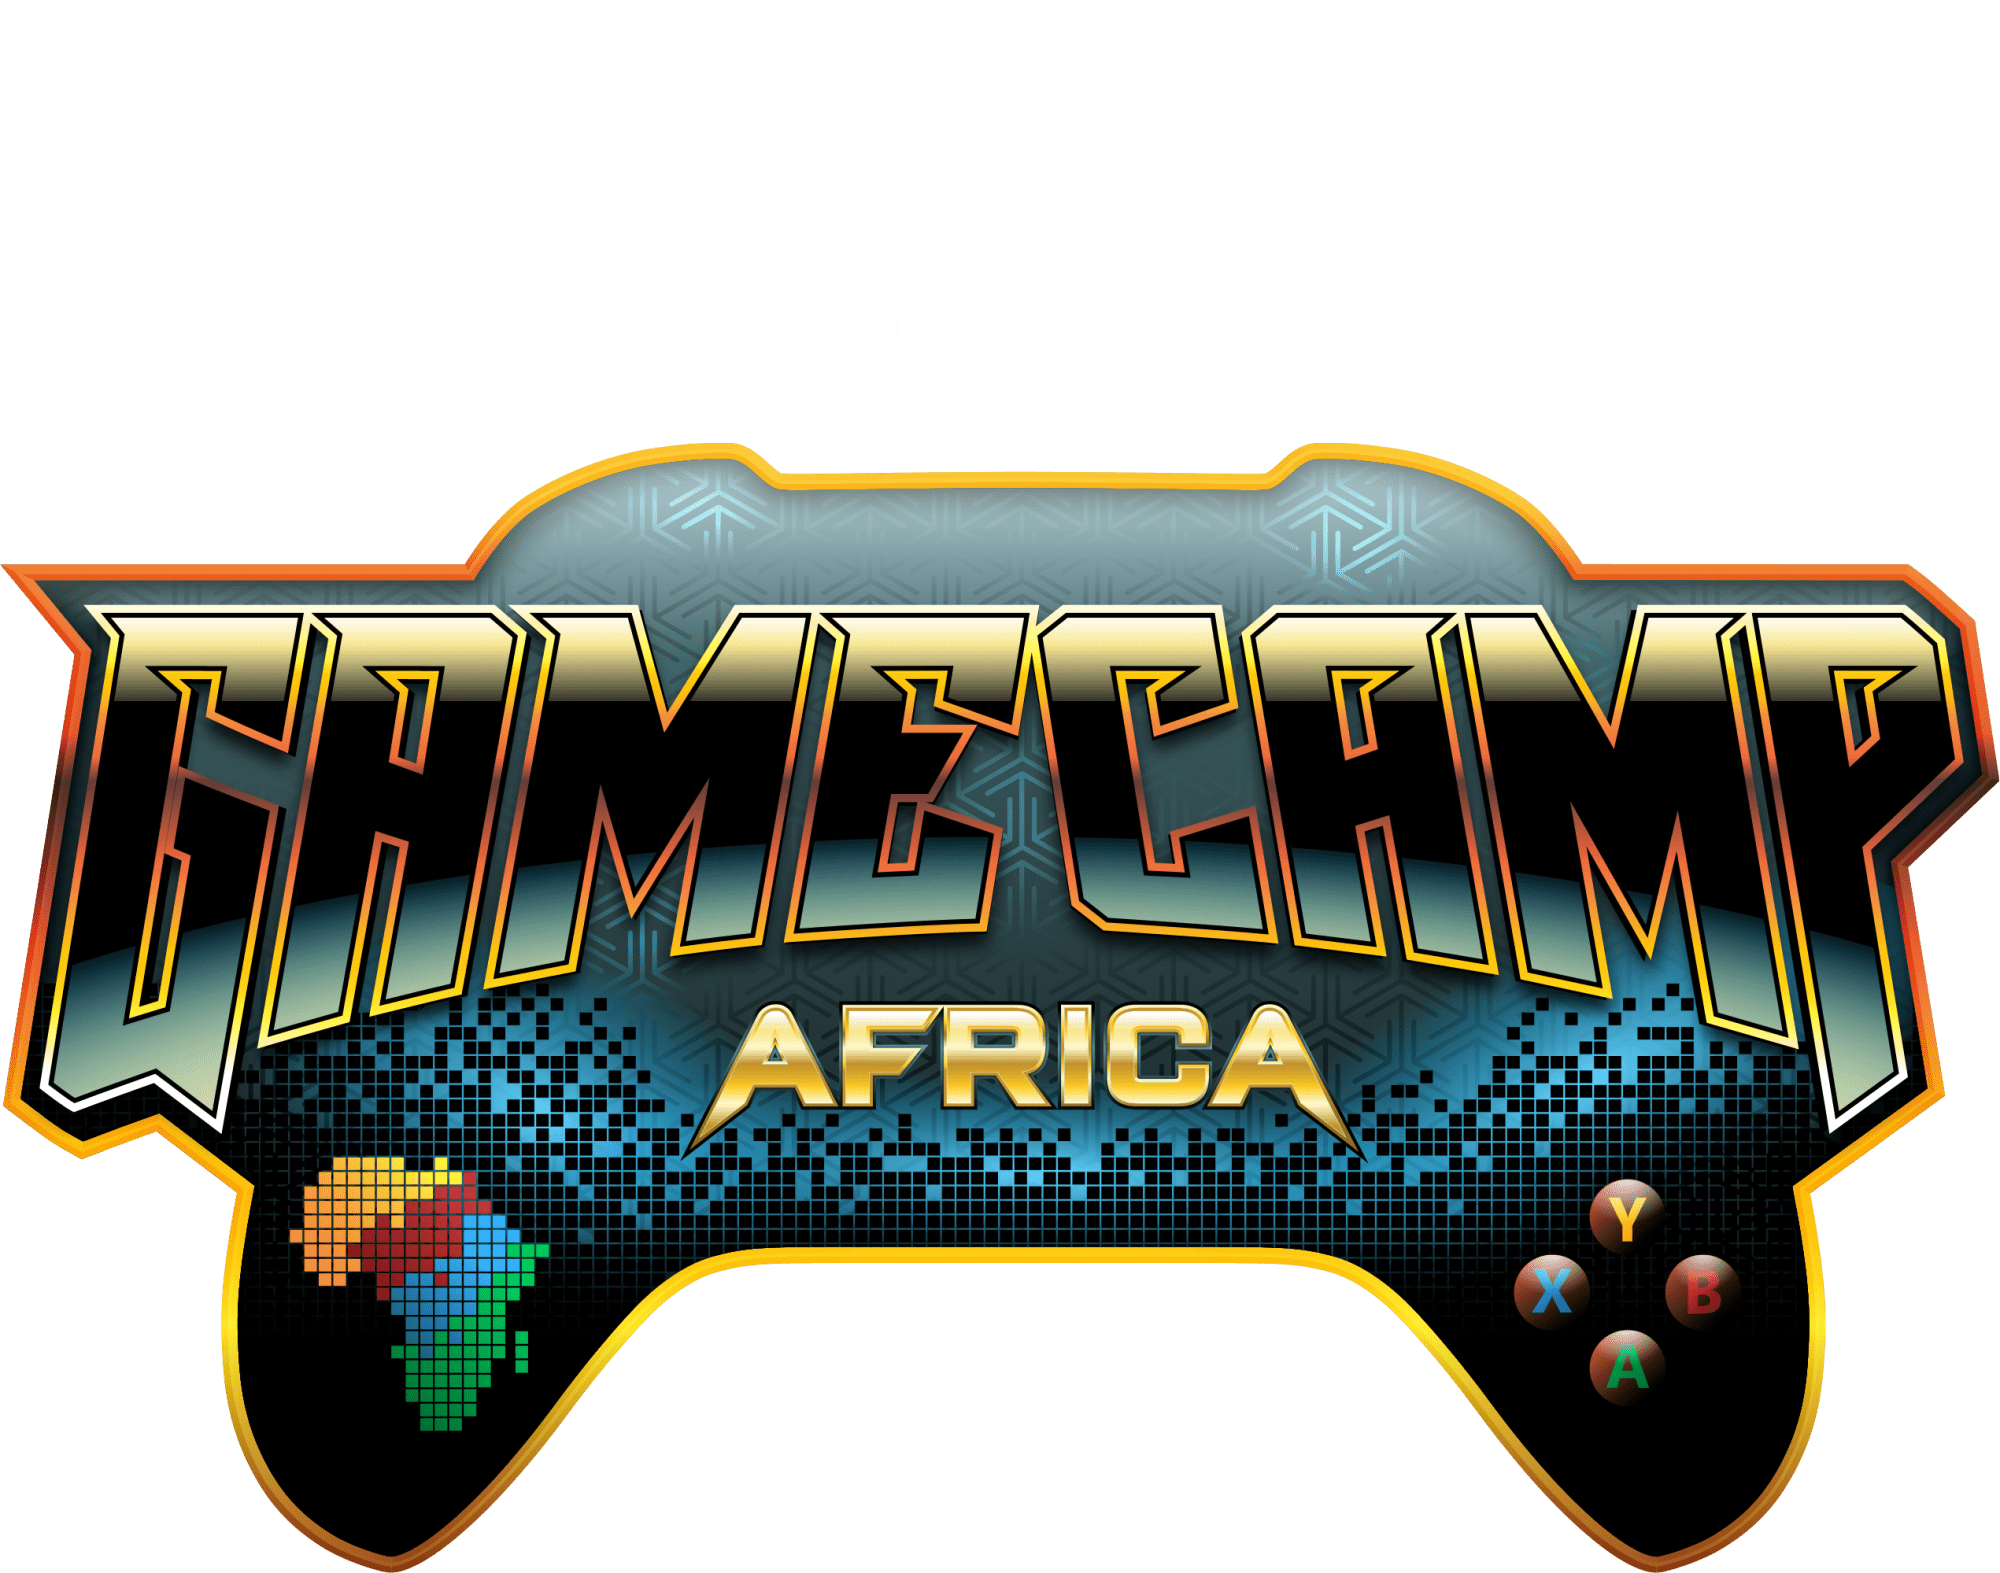 Game Camp Africa by Xbox is coming to Egypy